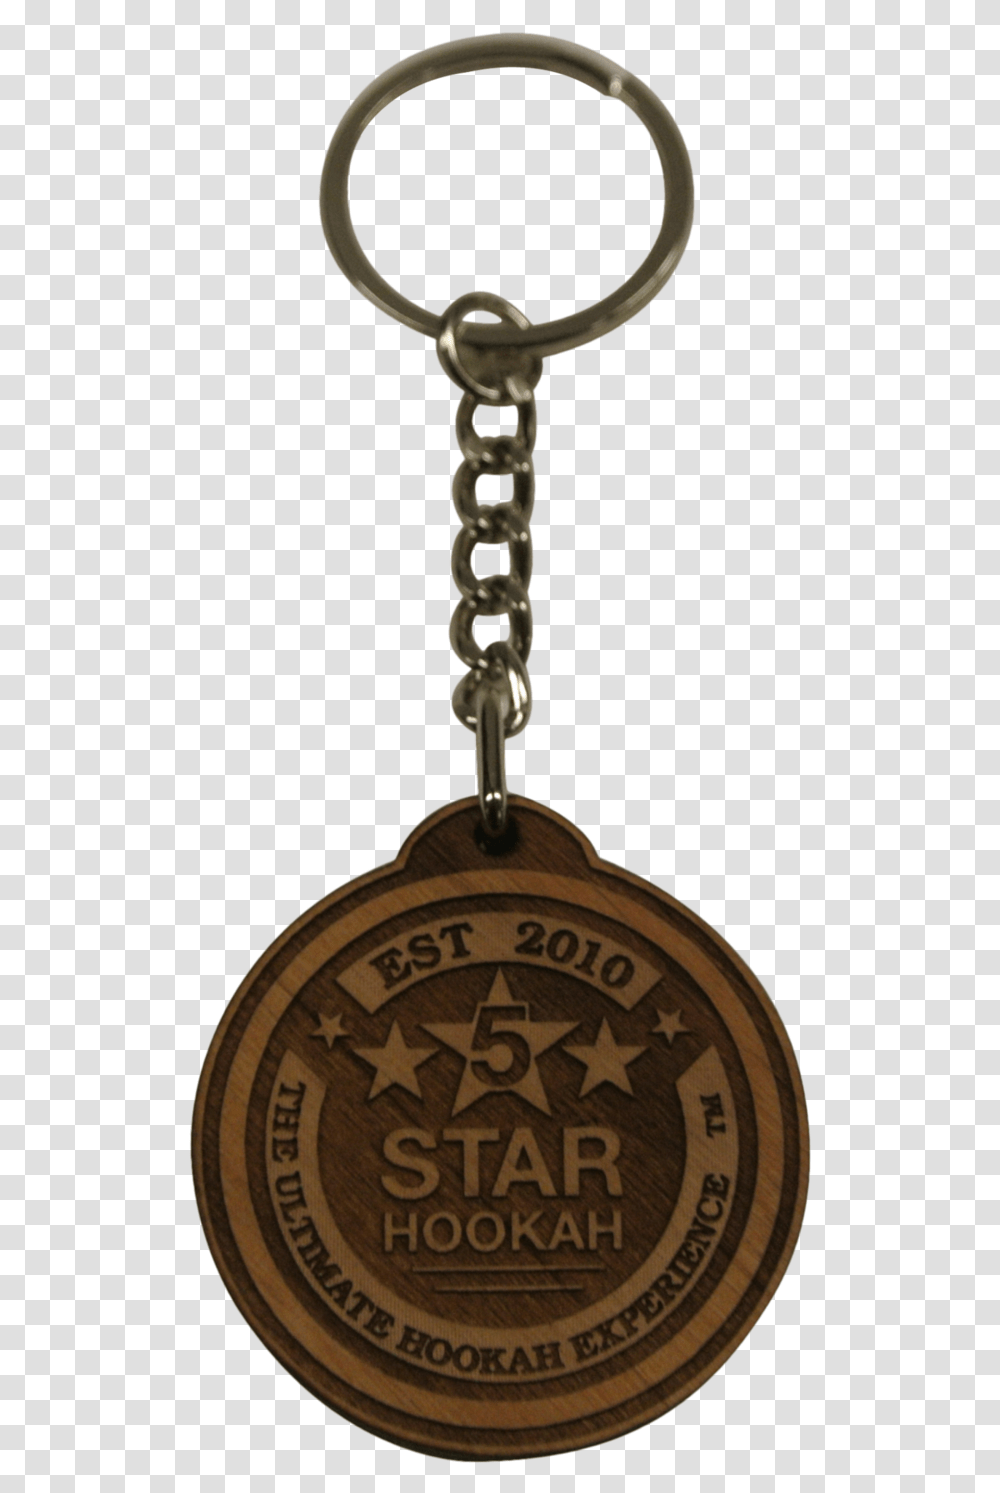 Star Hookah Wooden Round Key Chain Chain, Locket, Pendant, Jewelry, Accessories Transparent Png